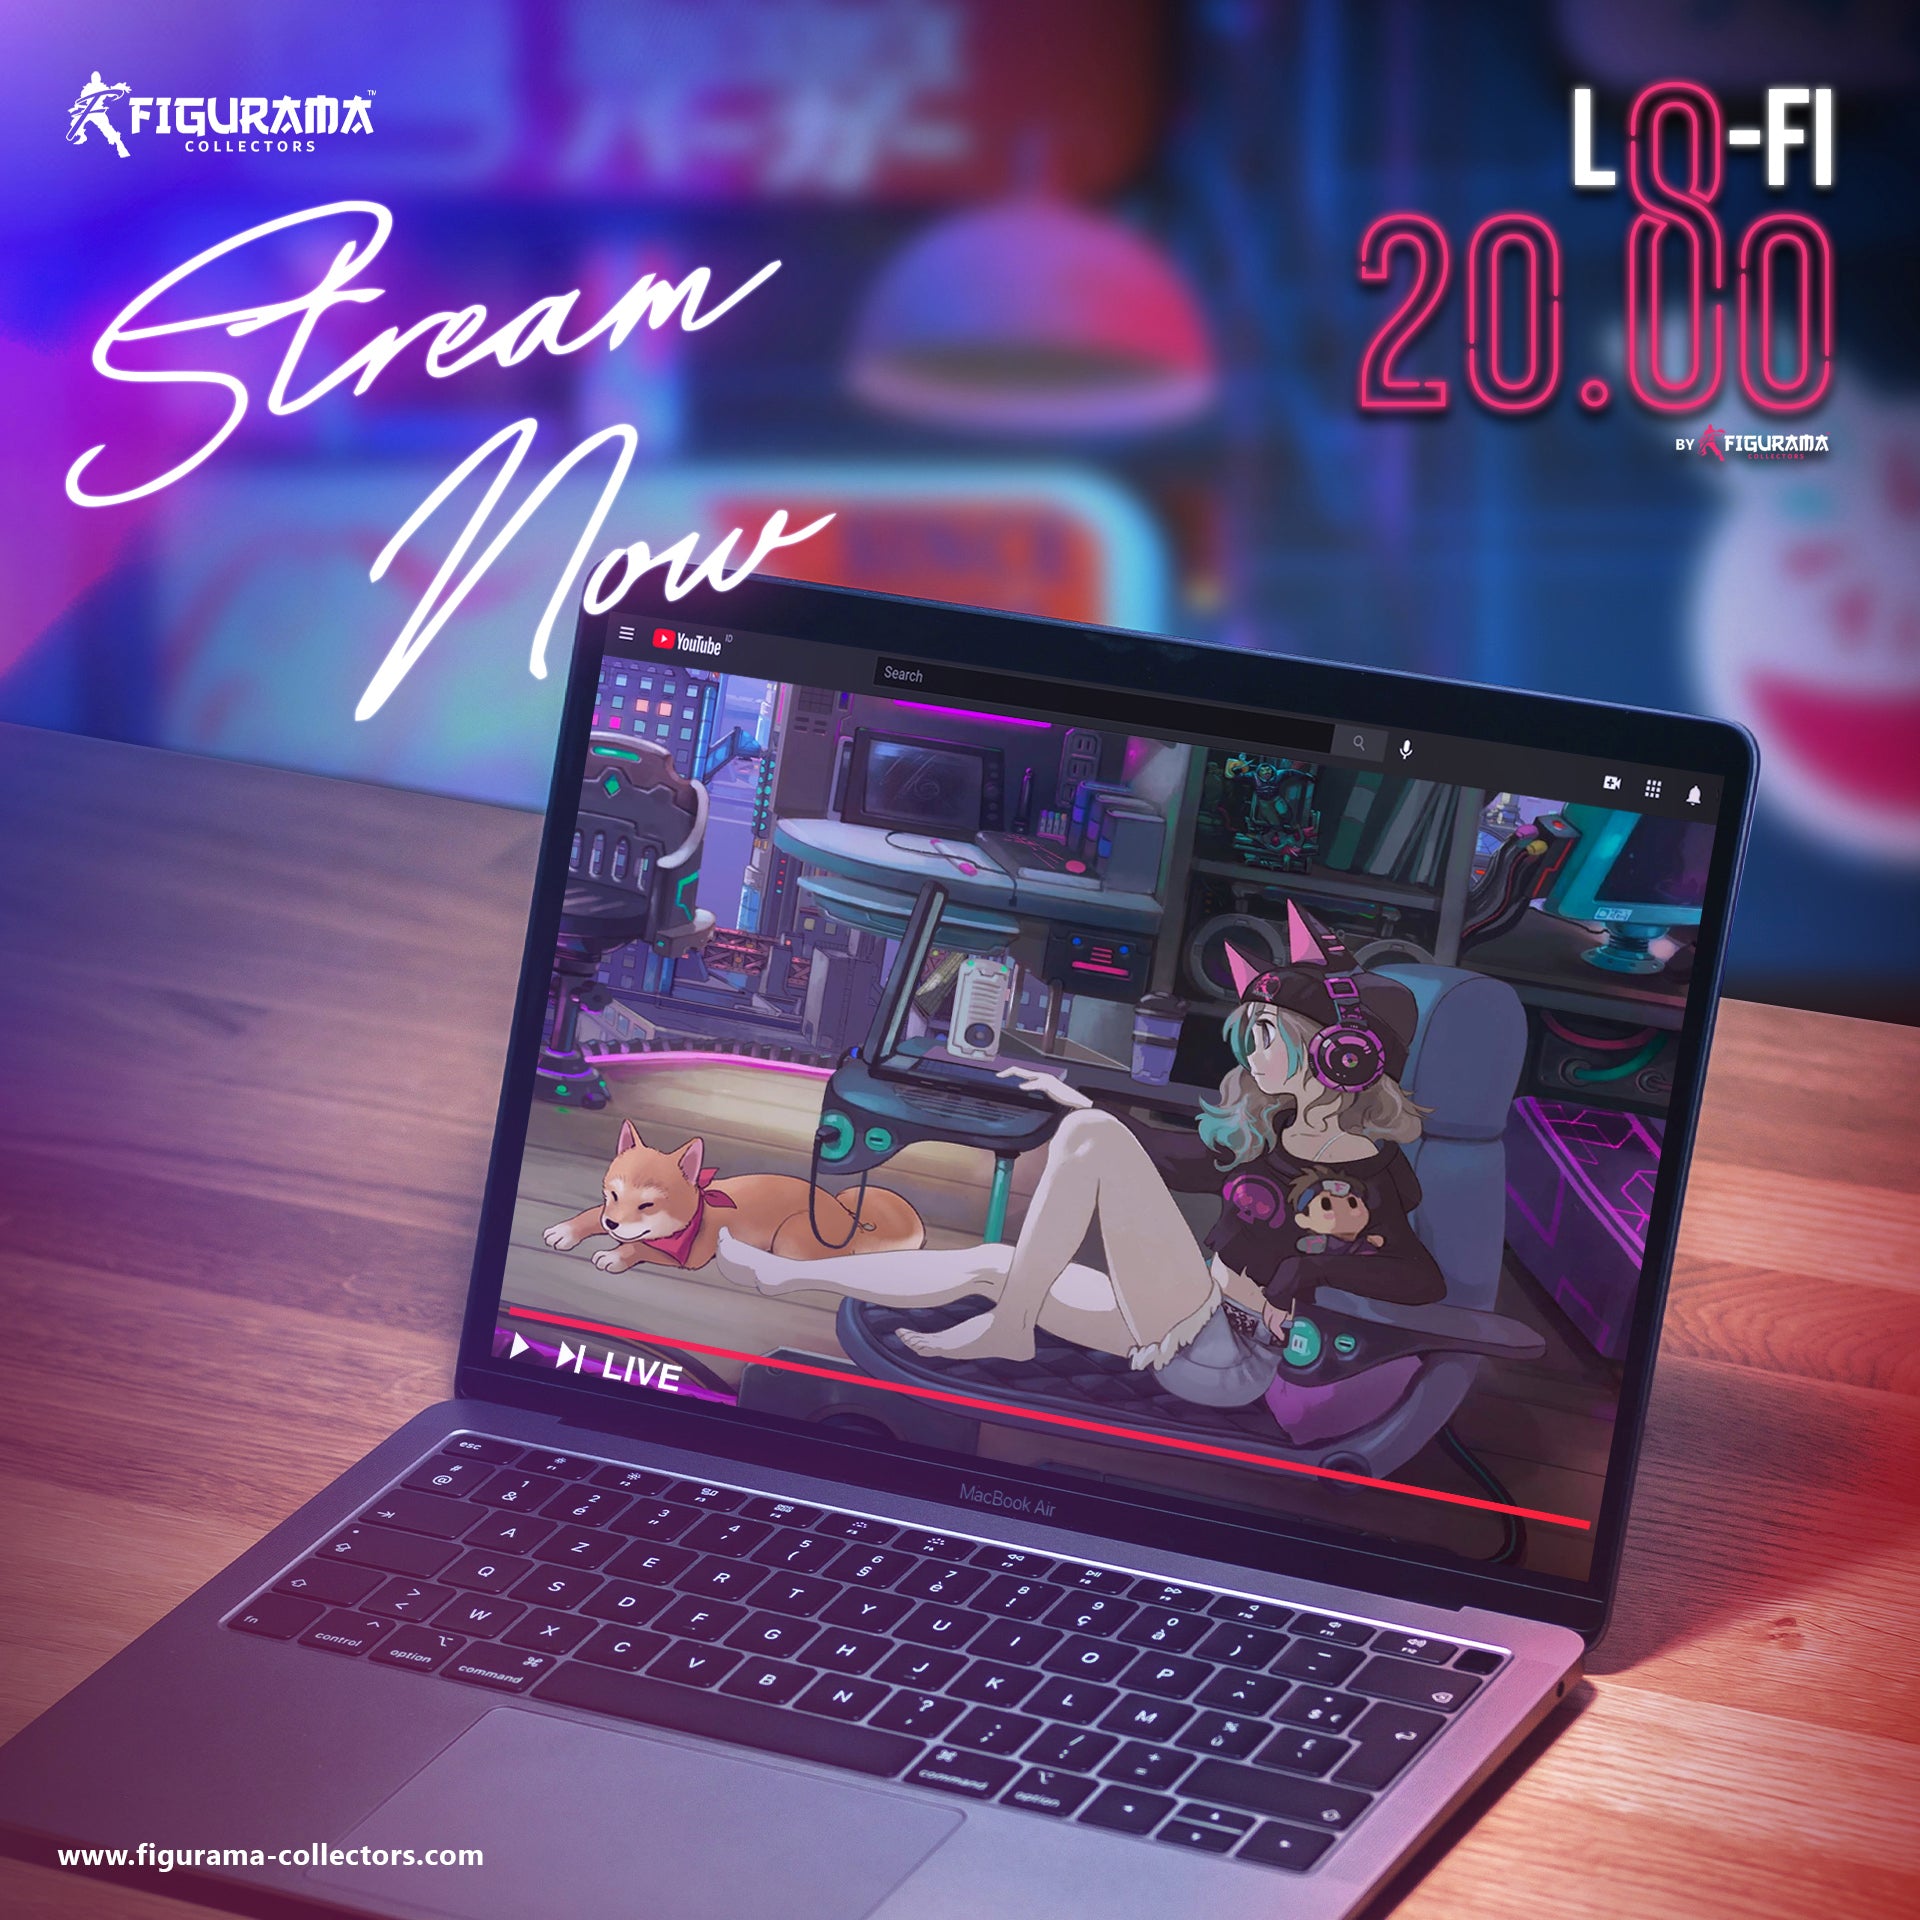 🎵NOW STREAMING!🎵 Tune into Lo-Fi20.80!